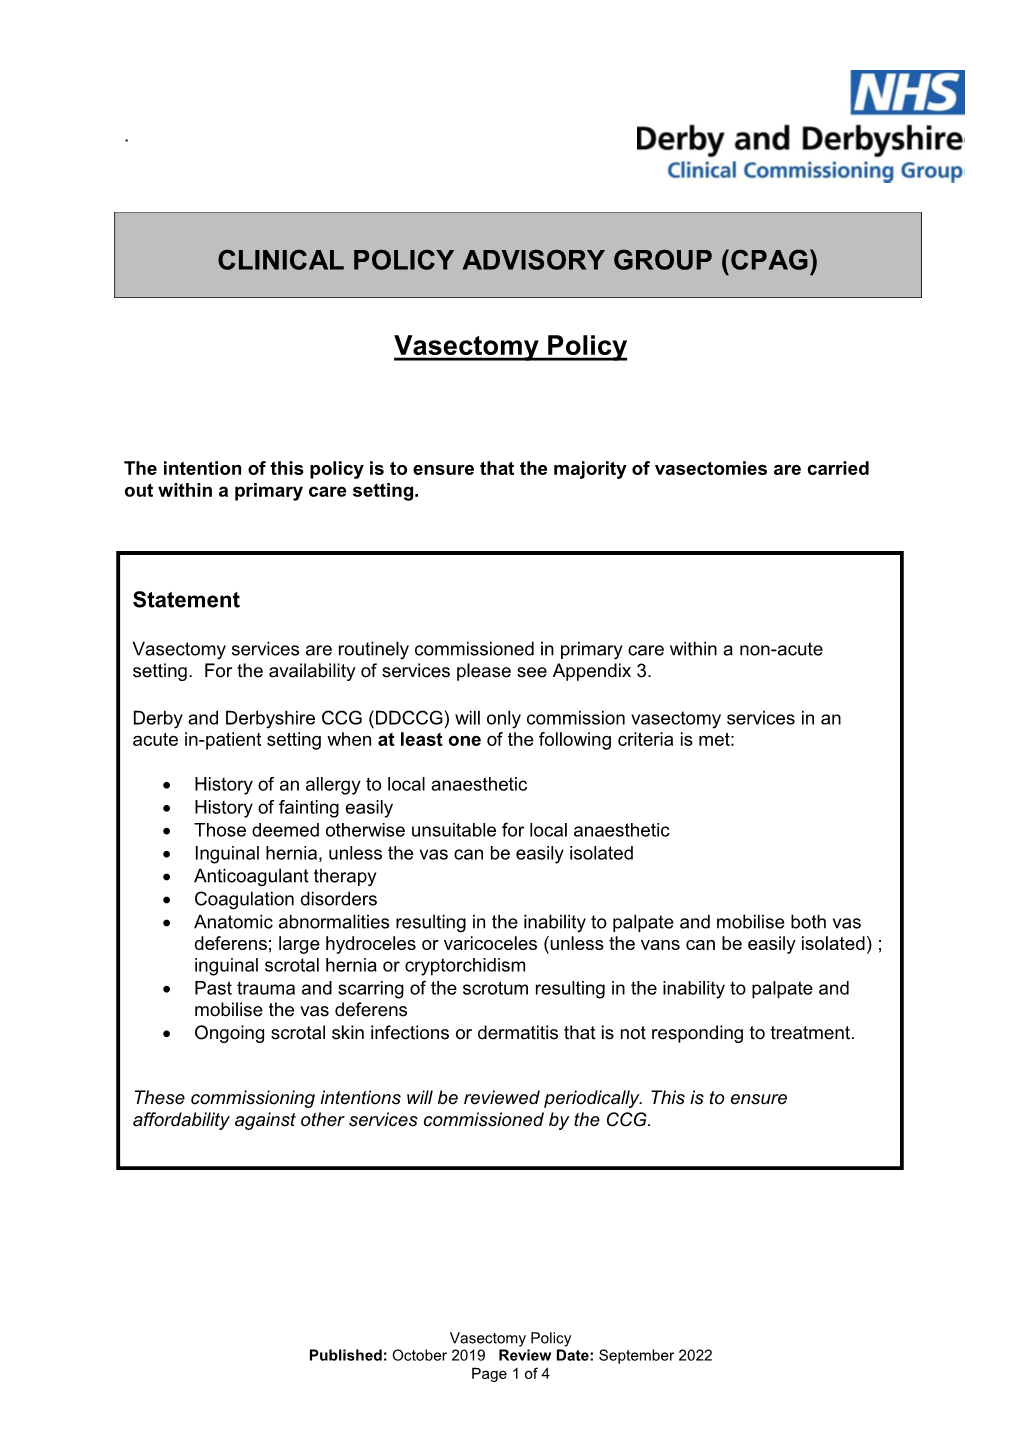 Vasectomy Policy CLINICAL POLICY ADVISORY GROUP